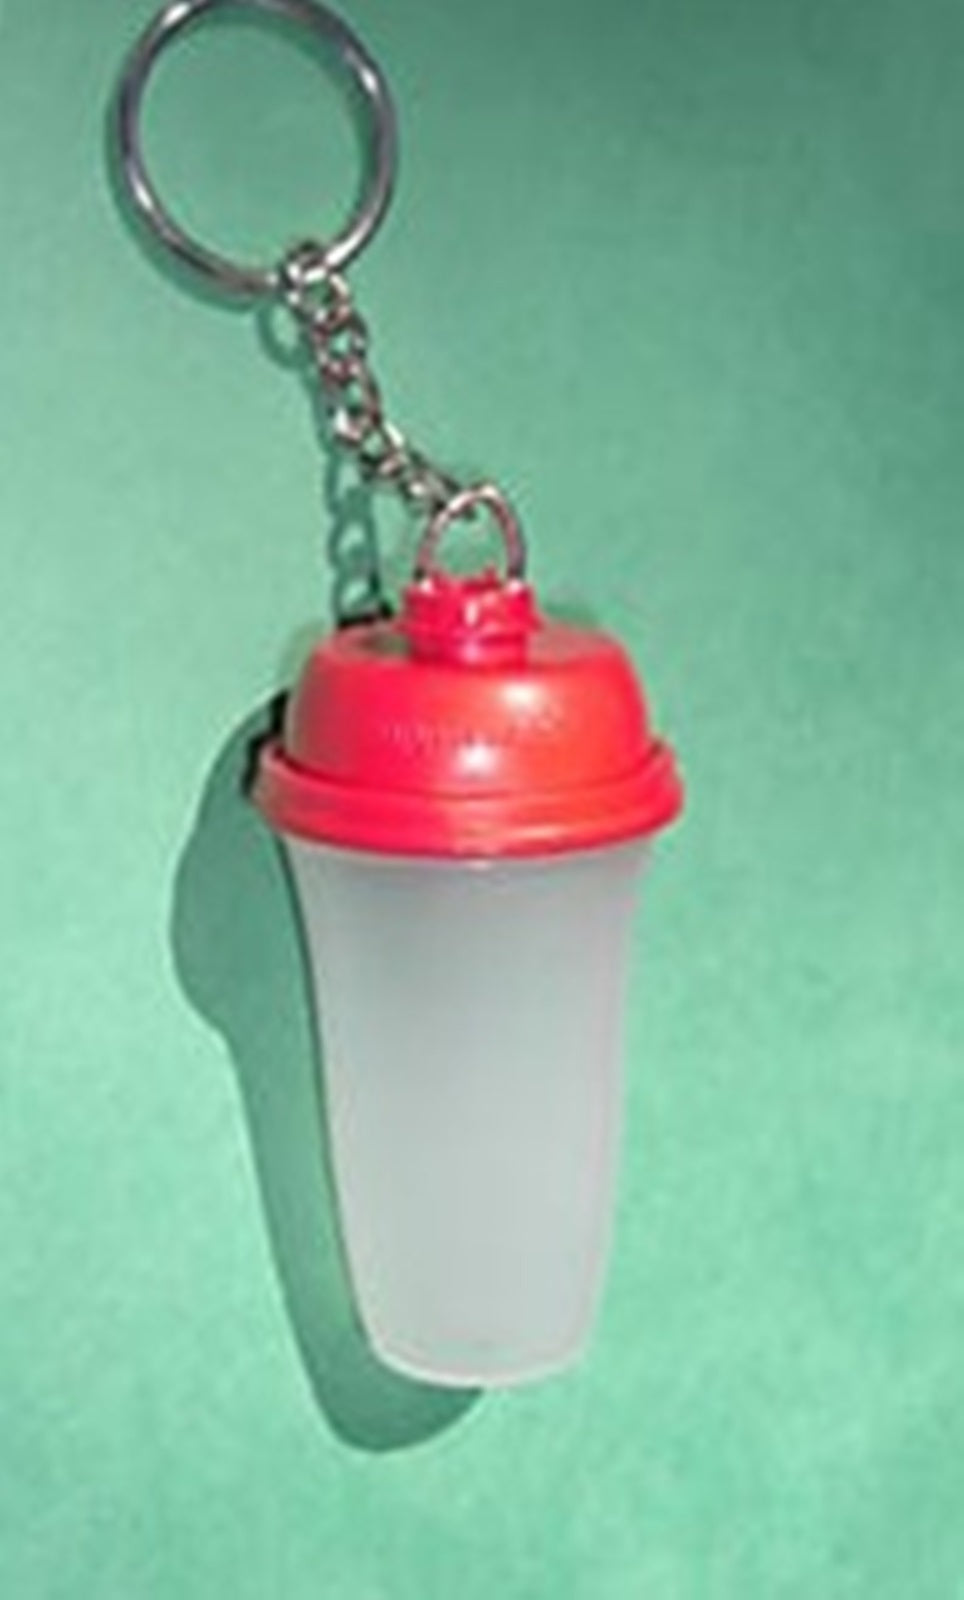 TUPPERWARE 1 ORIGINAL STYLE Mini QUICK SHAKE Keeper Container KeyChain RED